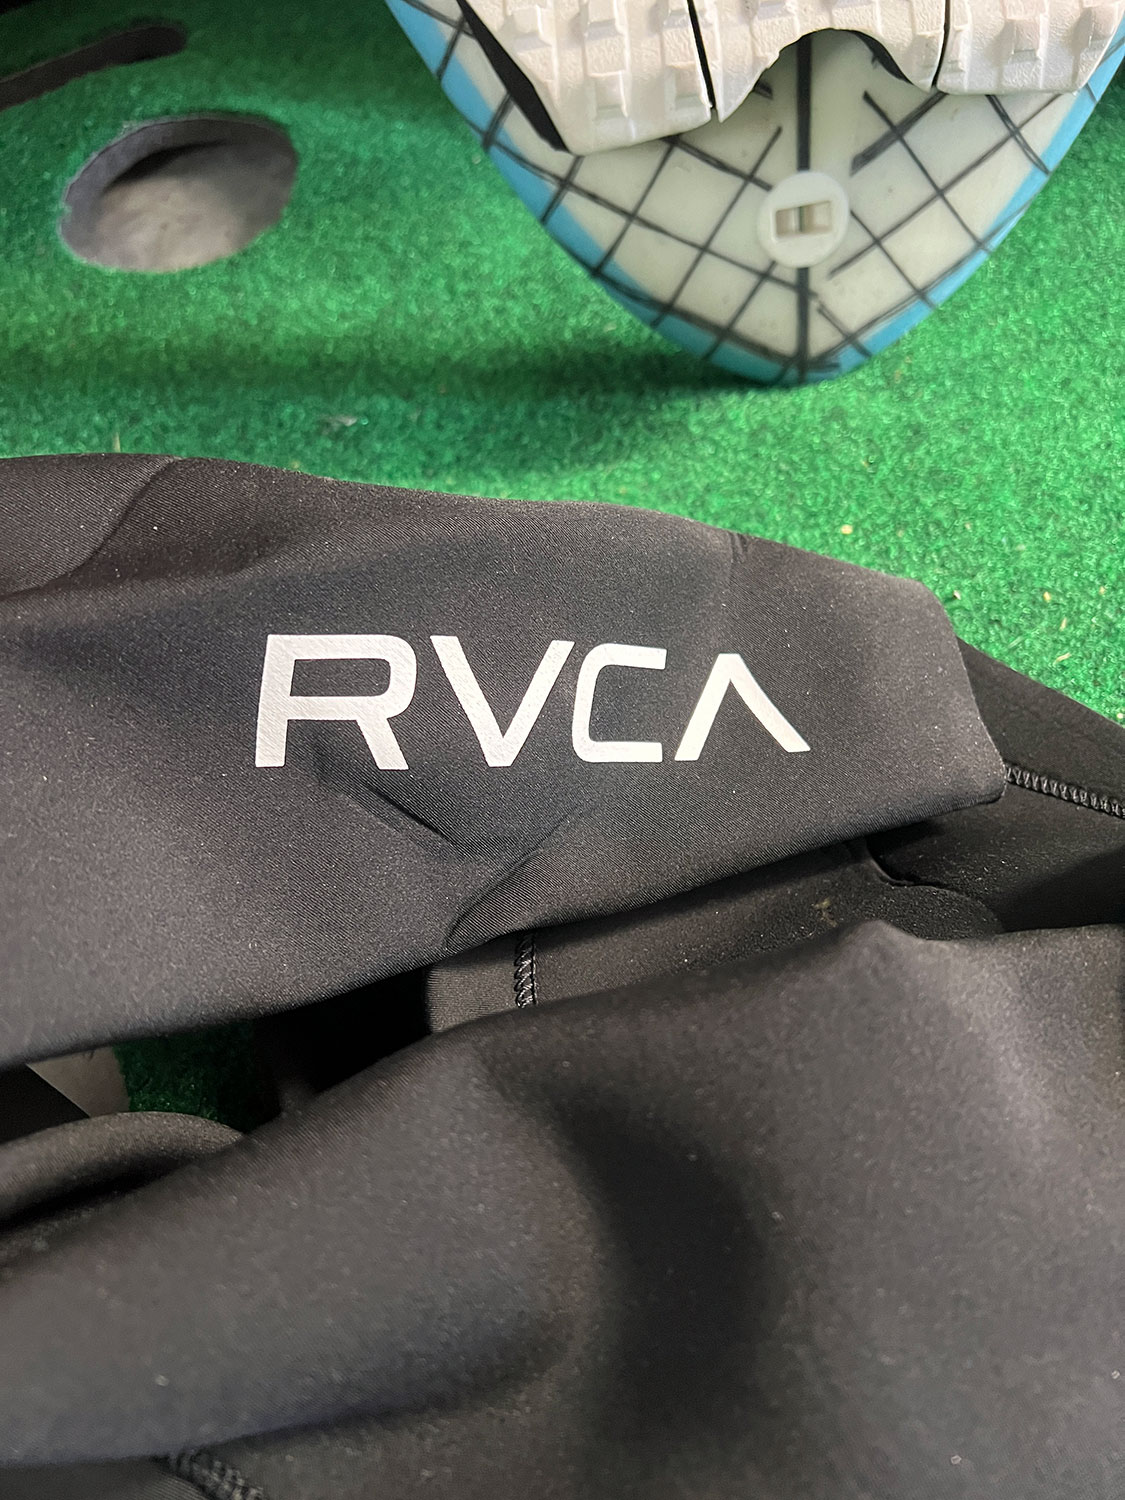 RVCA Balance Wetsuit Review